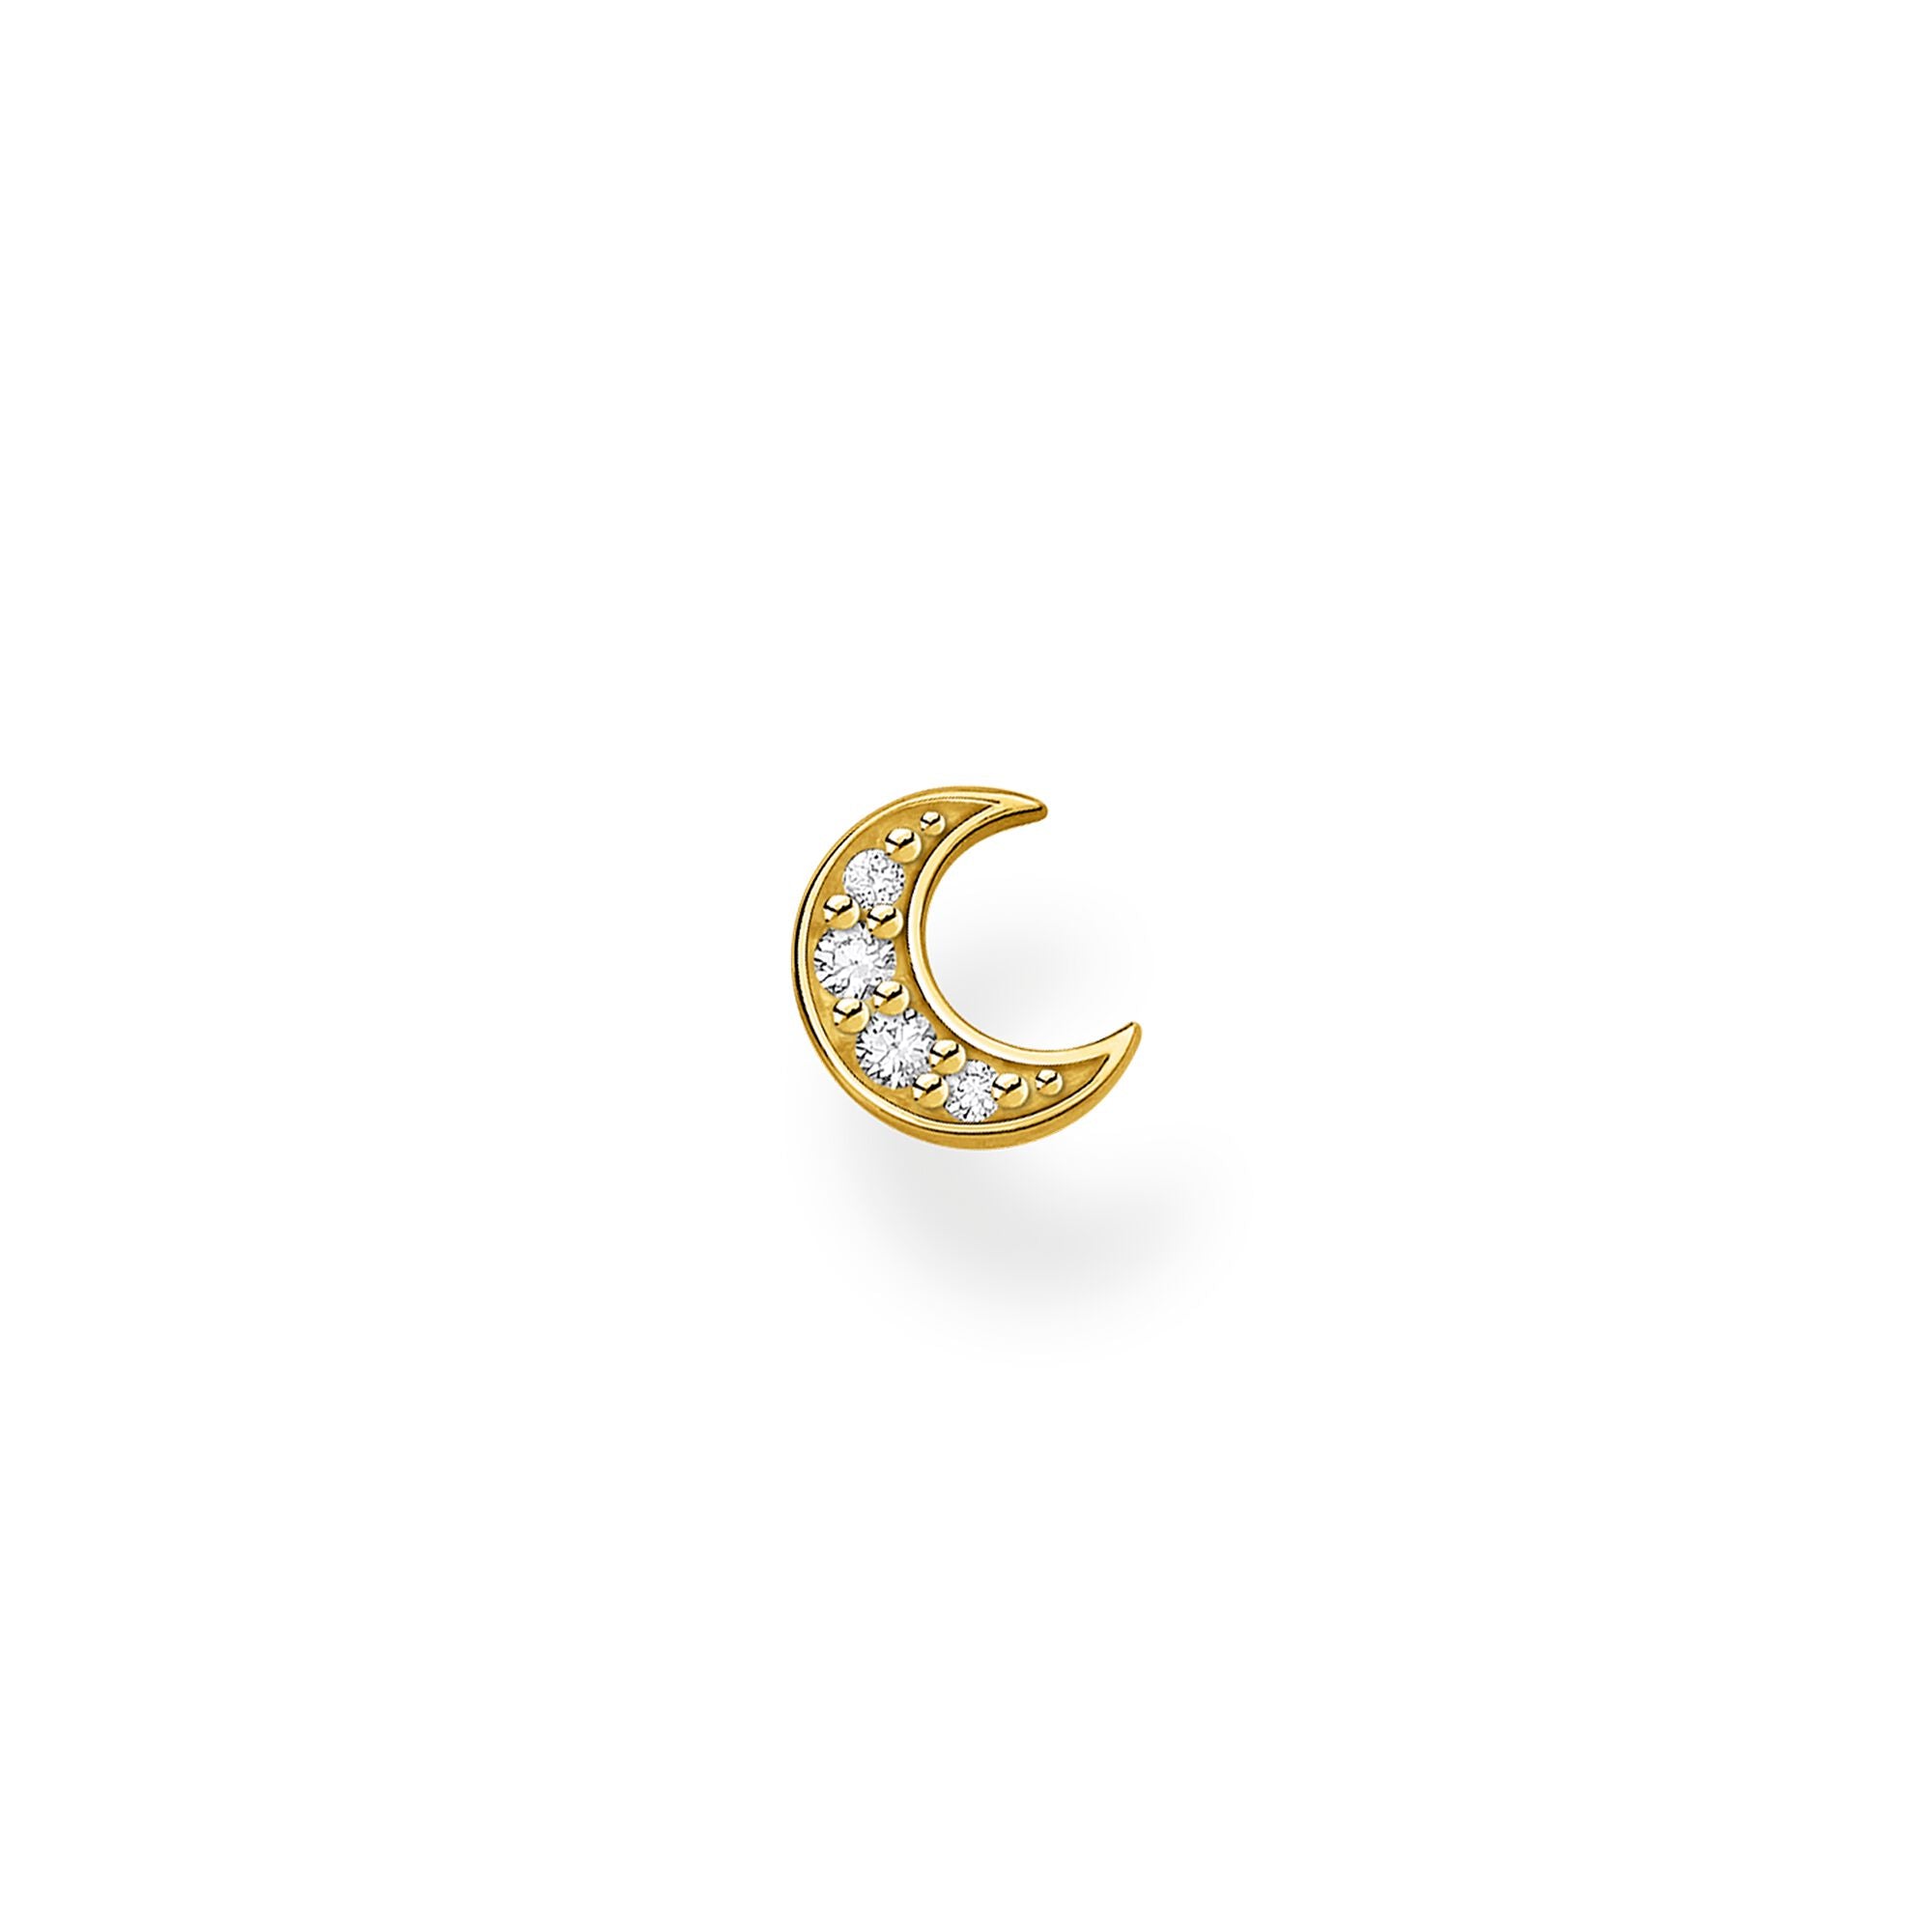 Thomas Sabo Sterling Silver Pave Crescent Moon Single Stud Earring